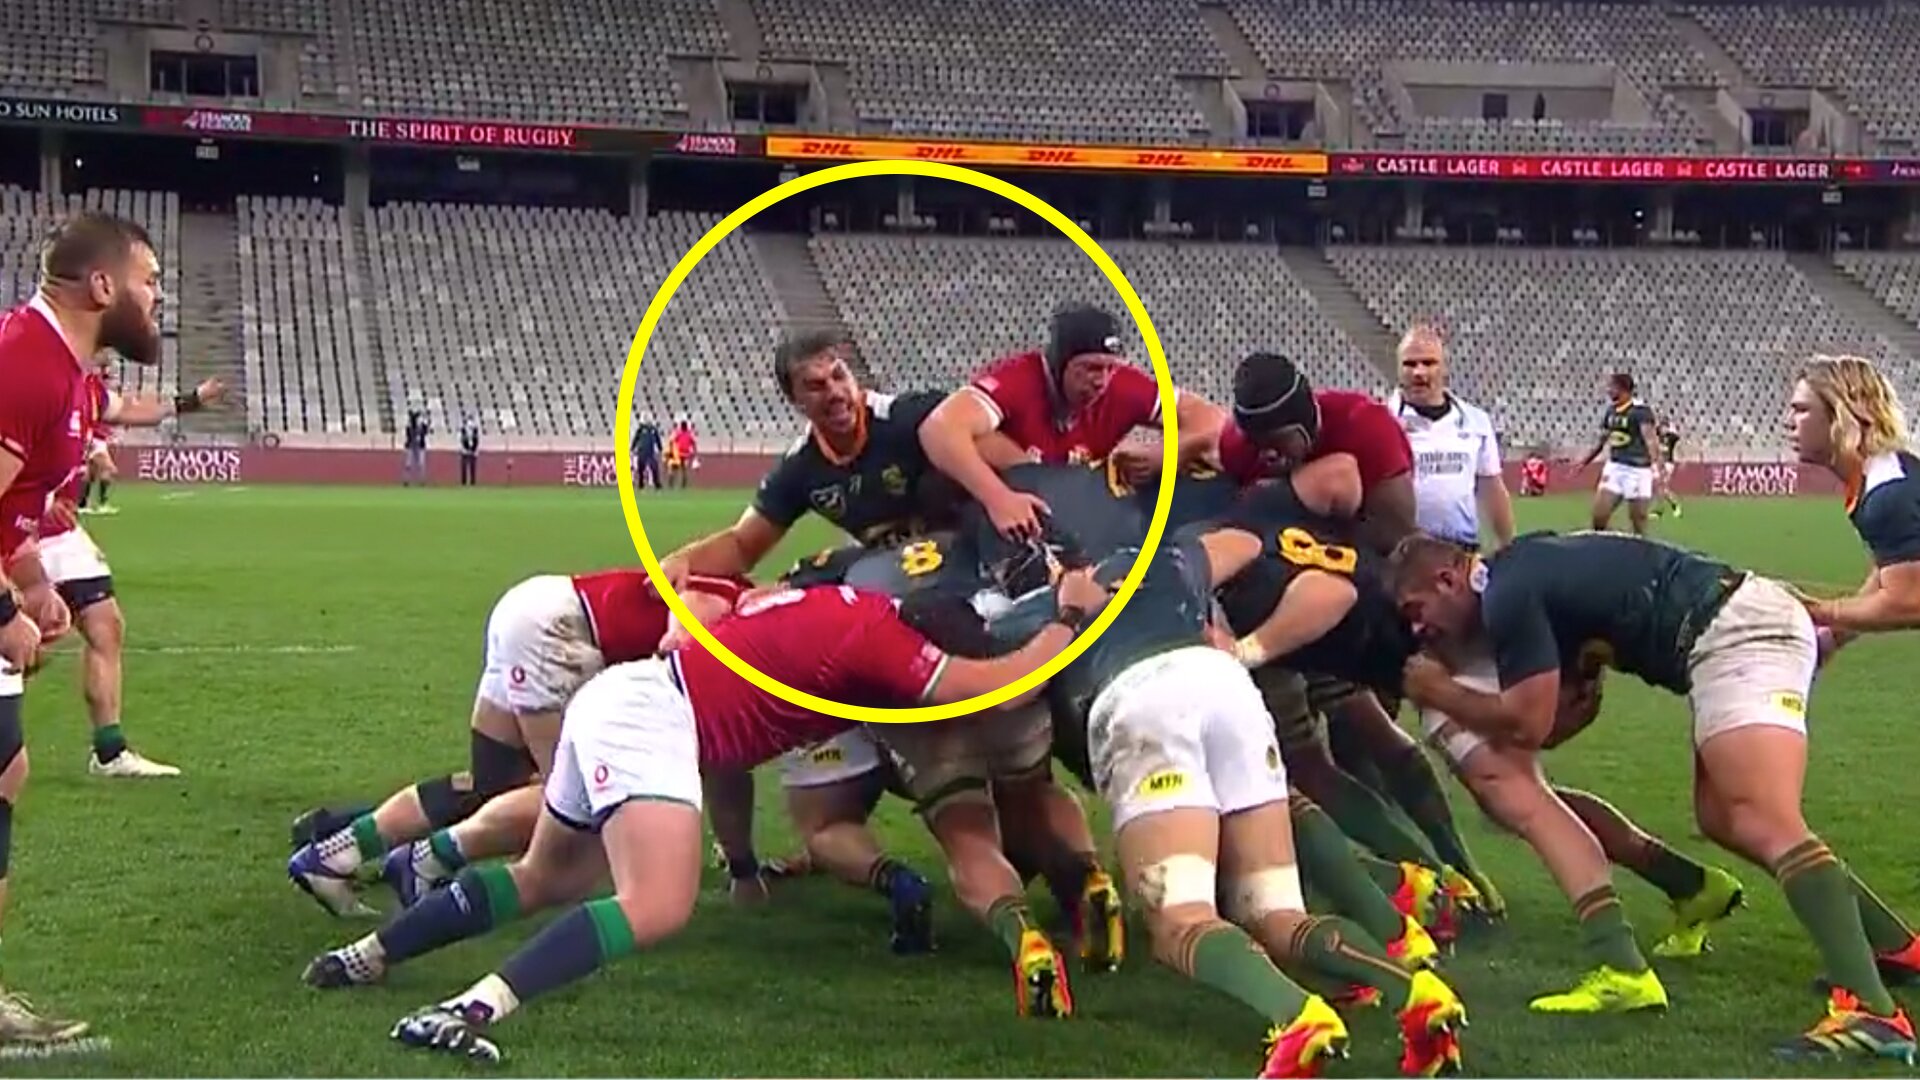 Springbok captain Am shows ugly side of Springboks in unprovoked show of aggression